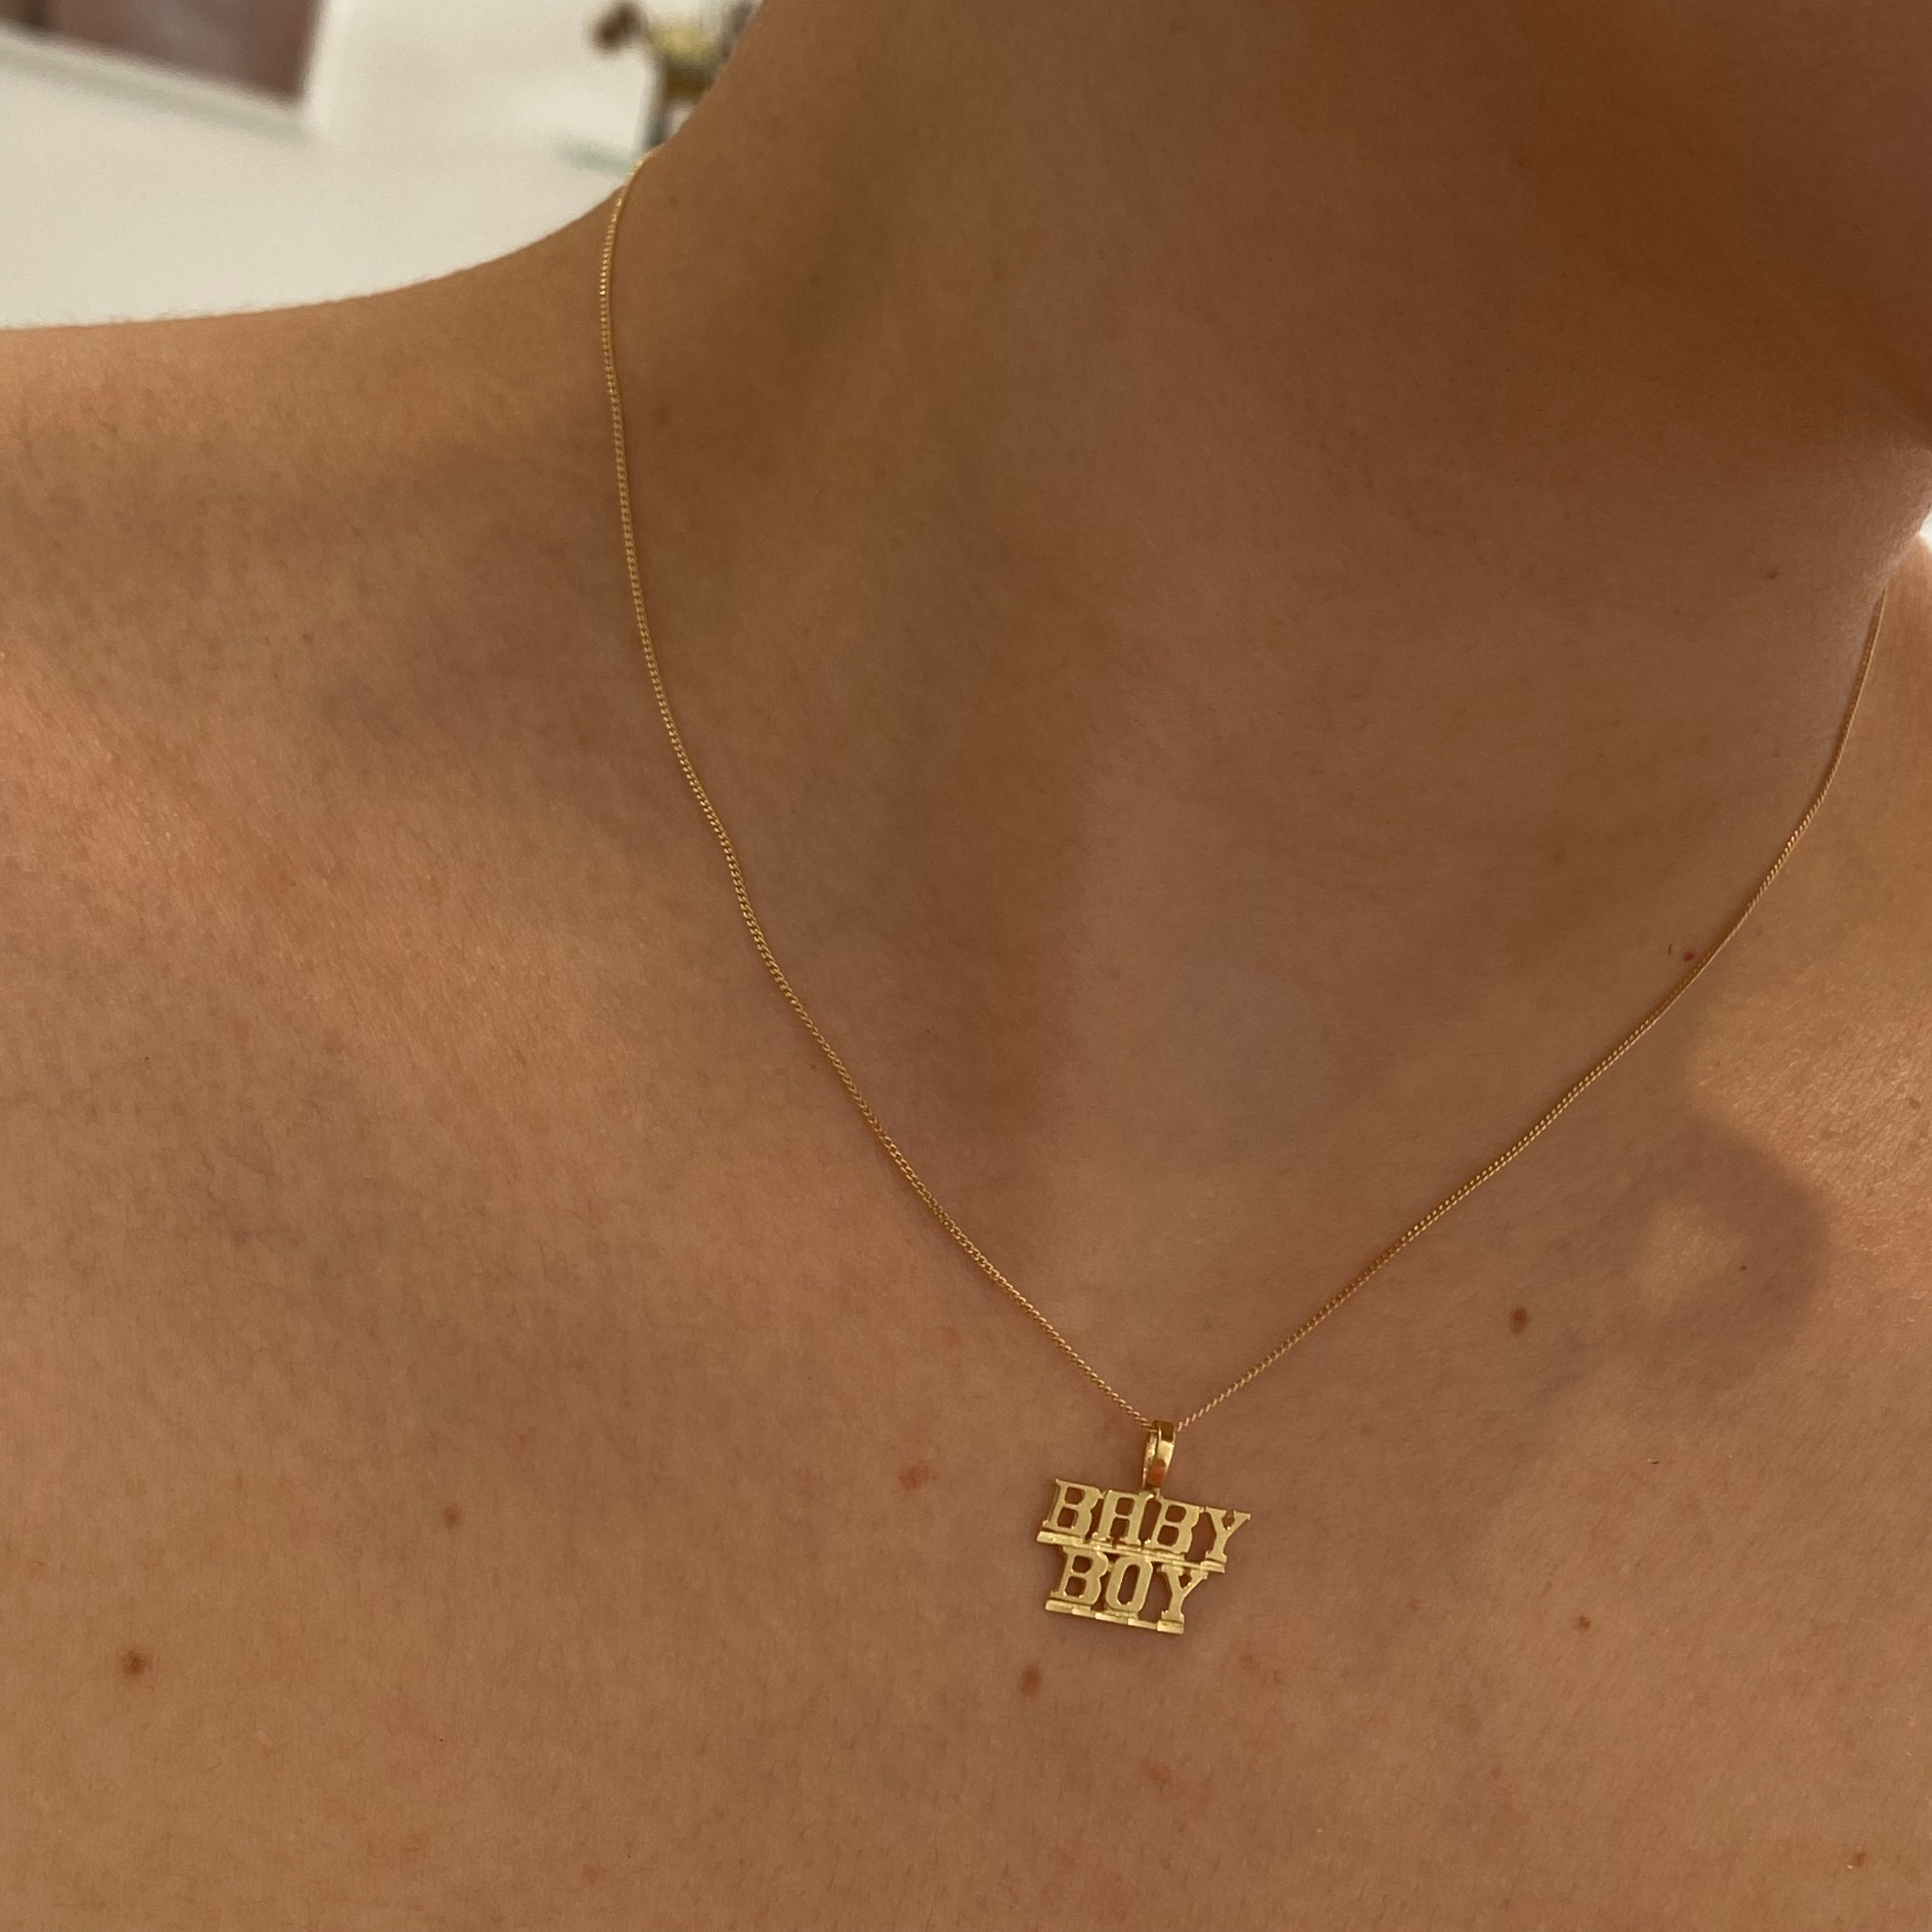 model wearing 10K Gold 'Baby Boy' pendant on a thin curb chain